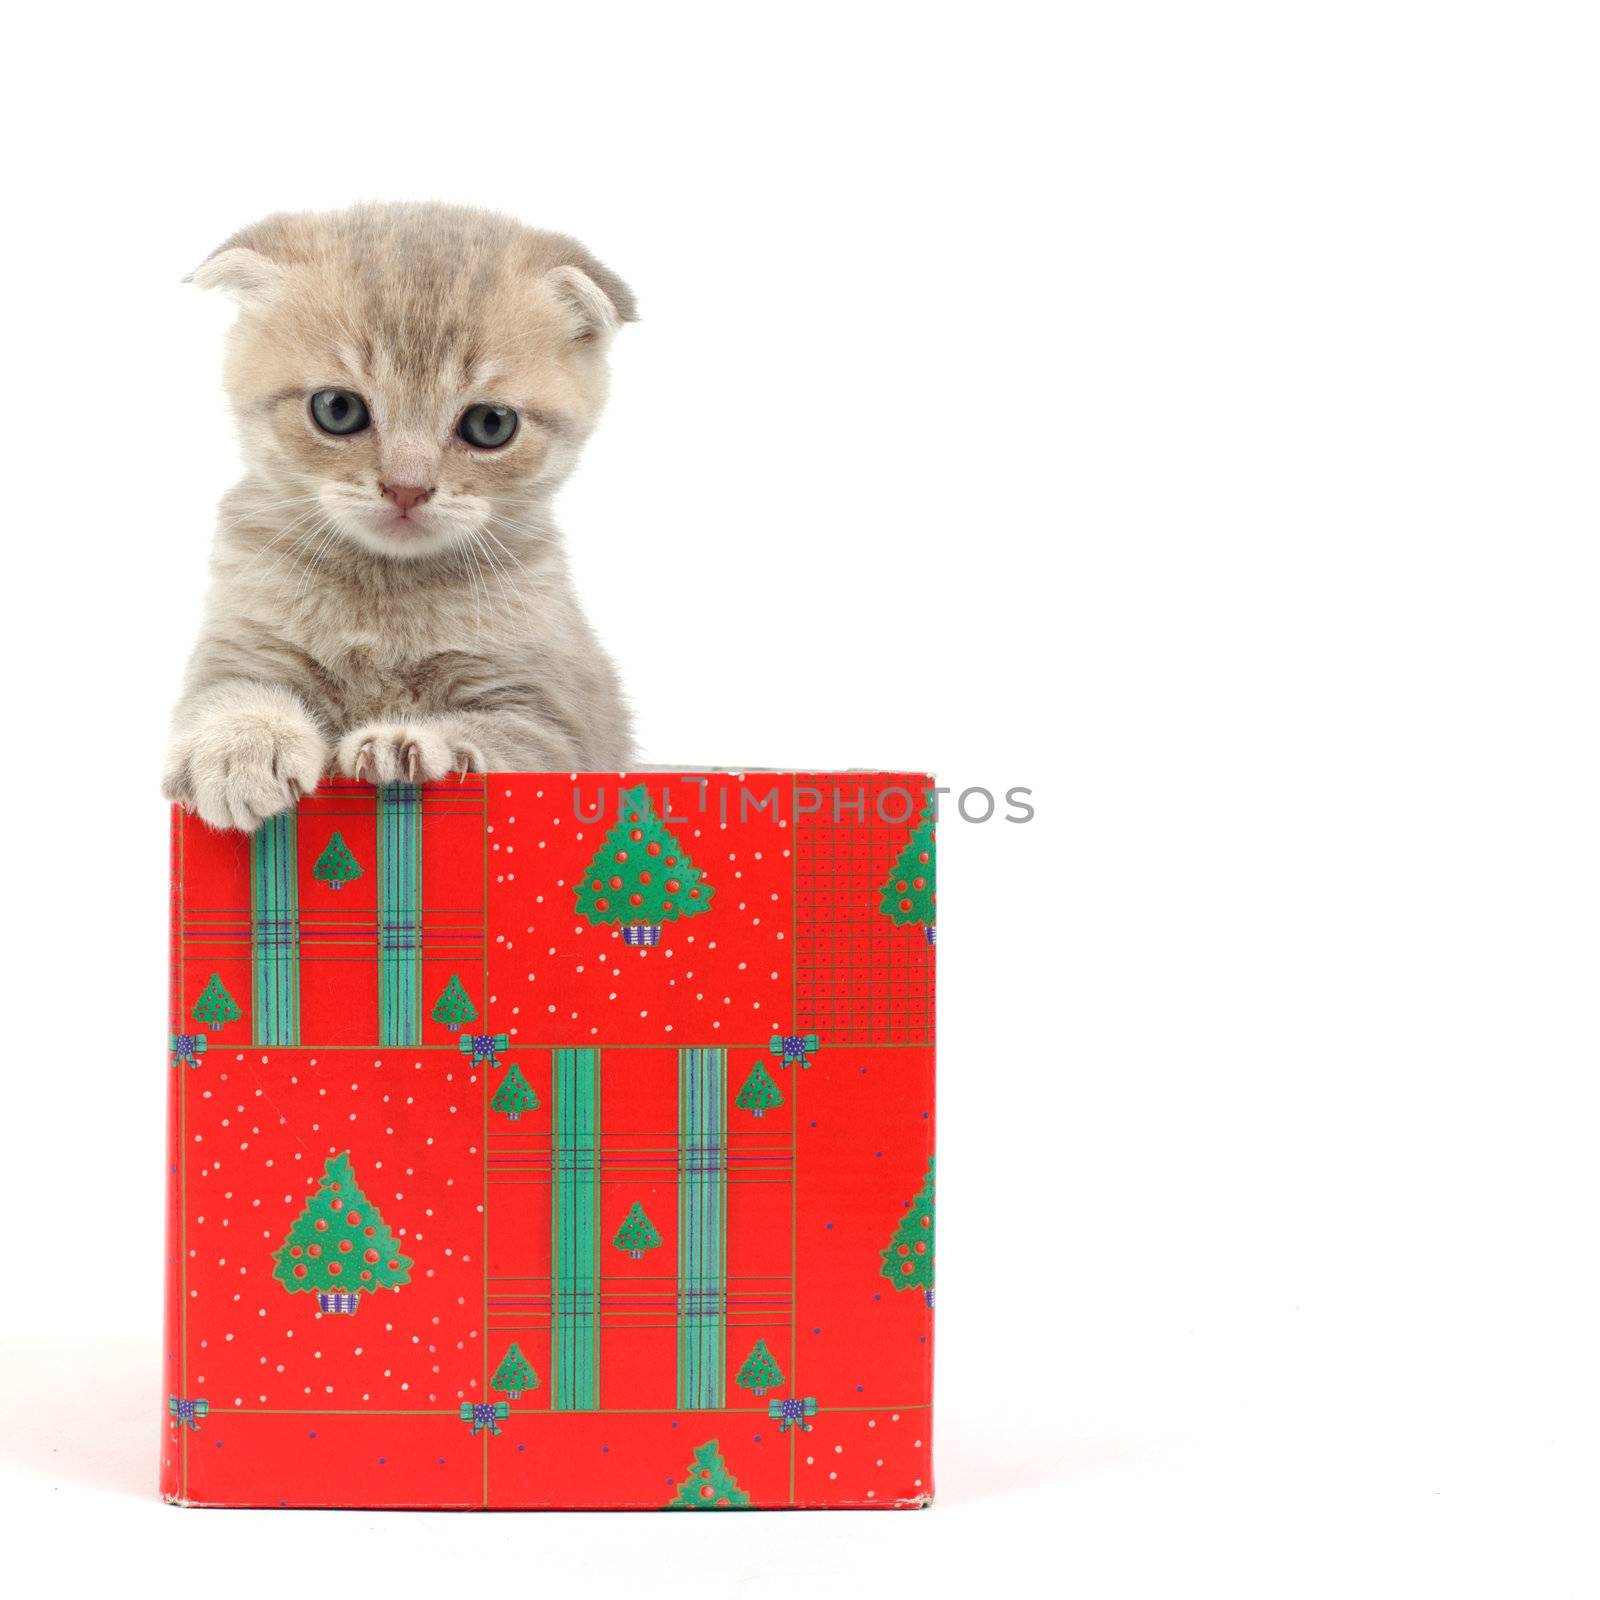 cat in gift box by Yellowj